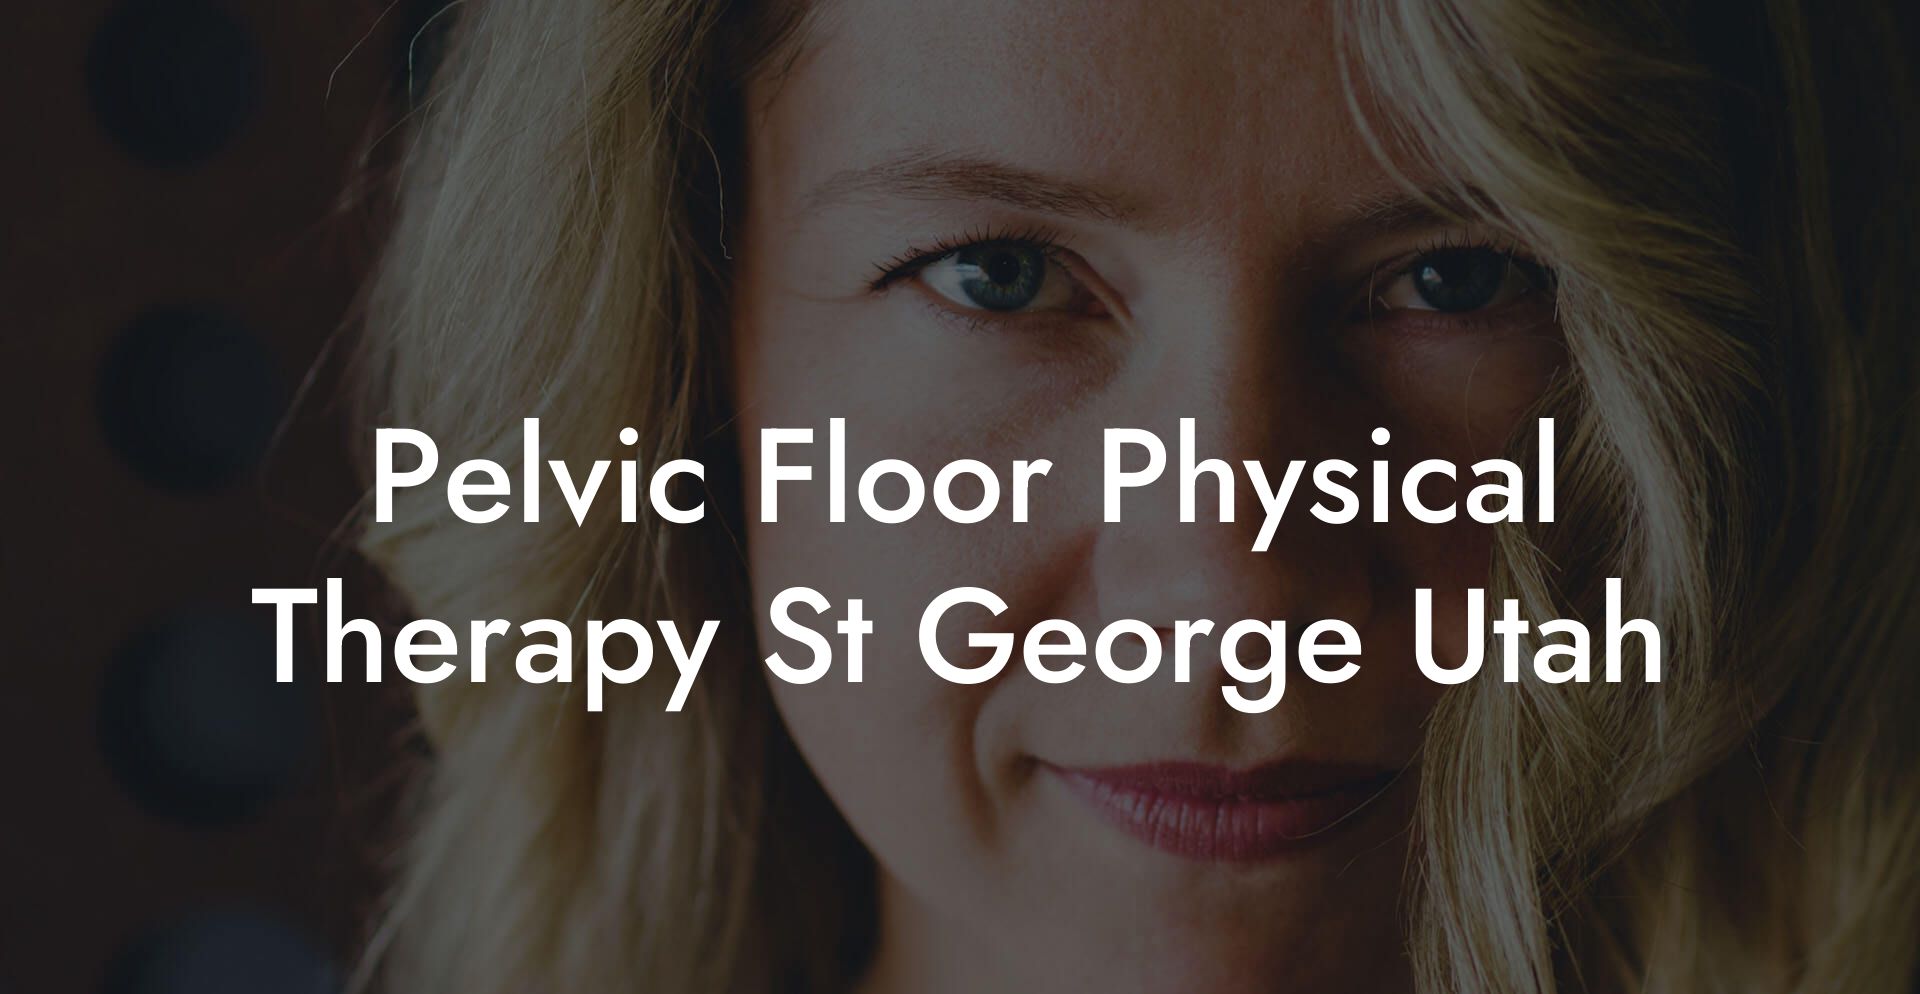 Pelvic Floor Physical Therapy St George Utah